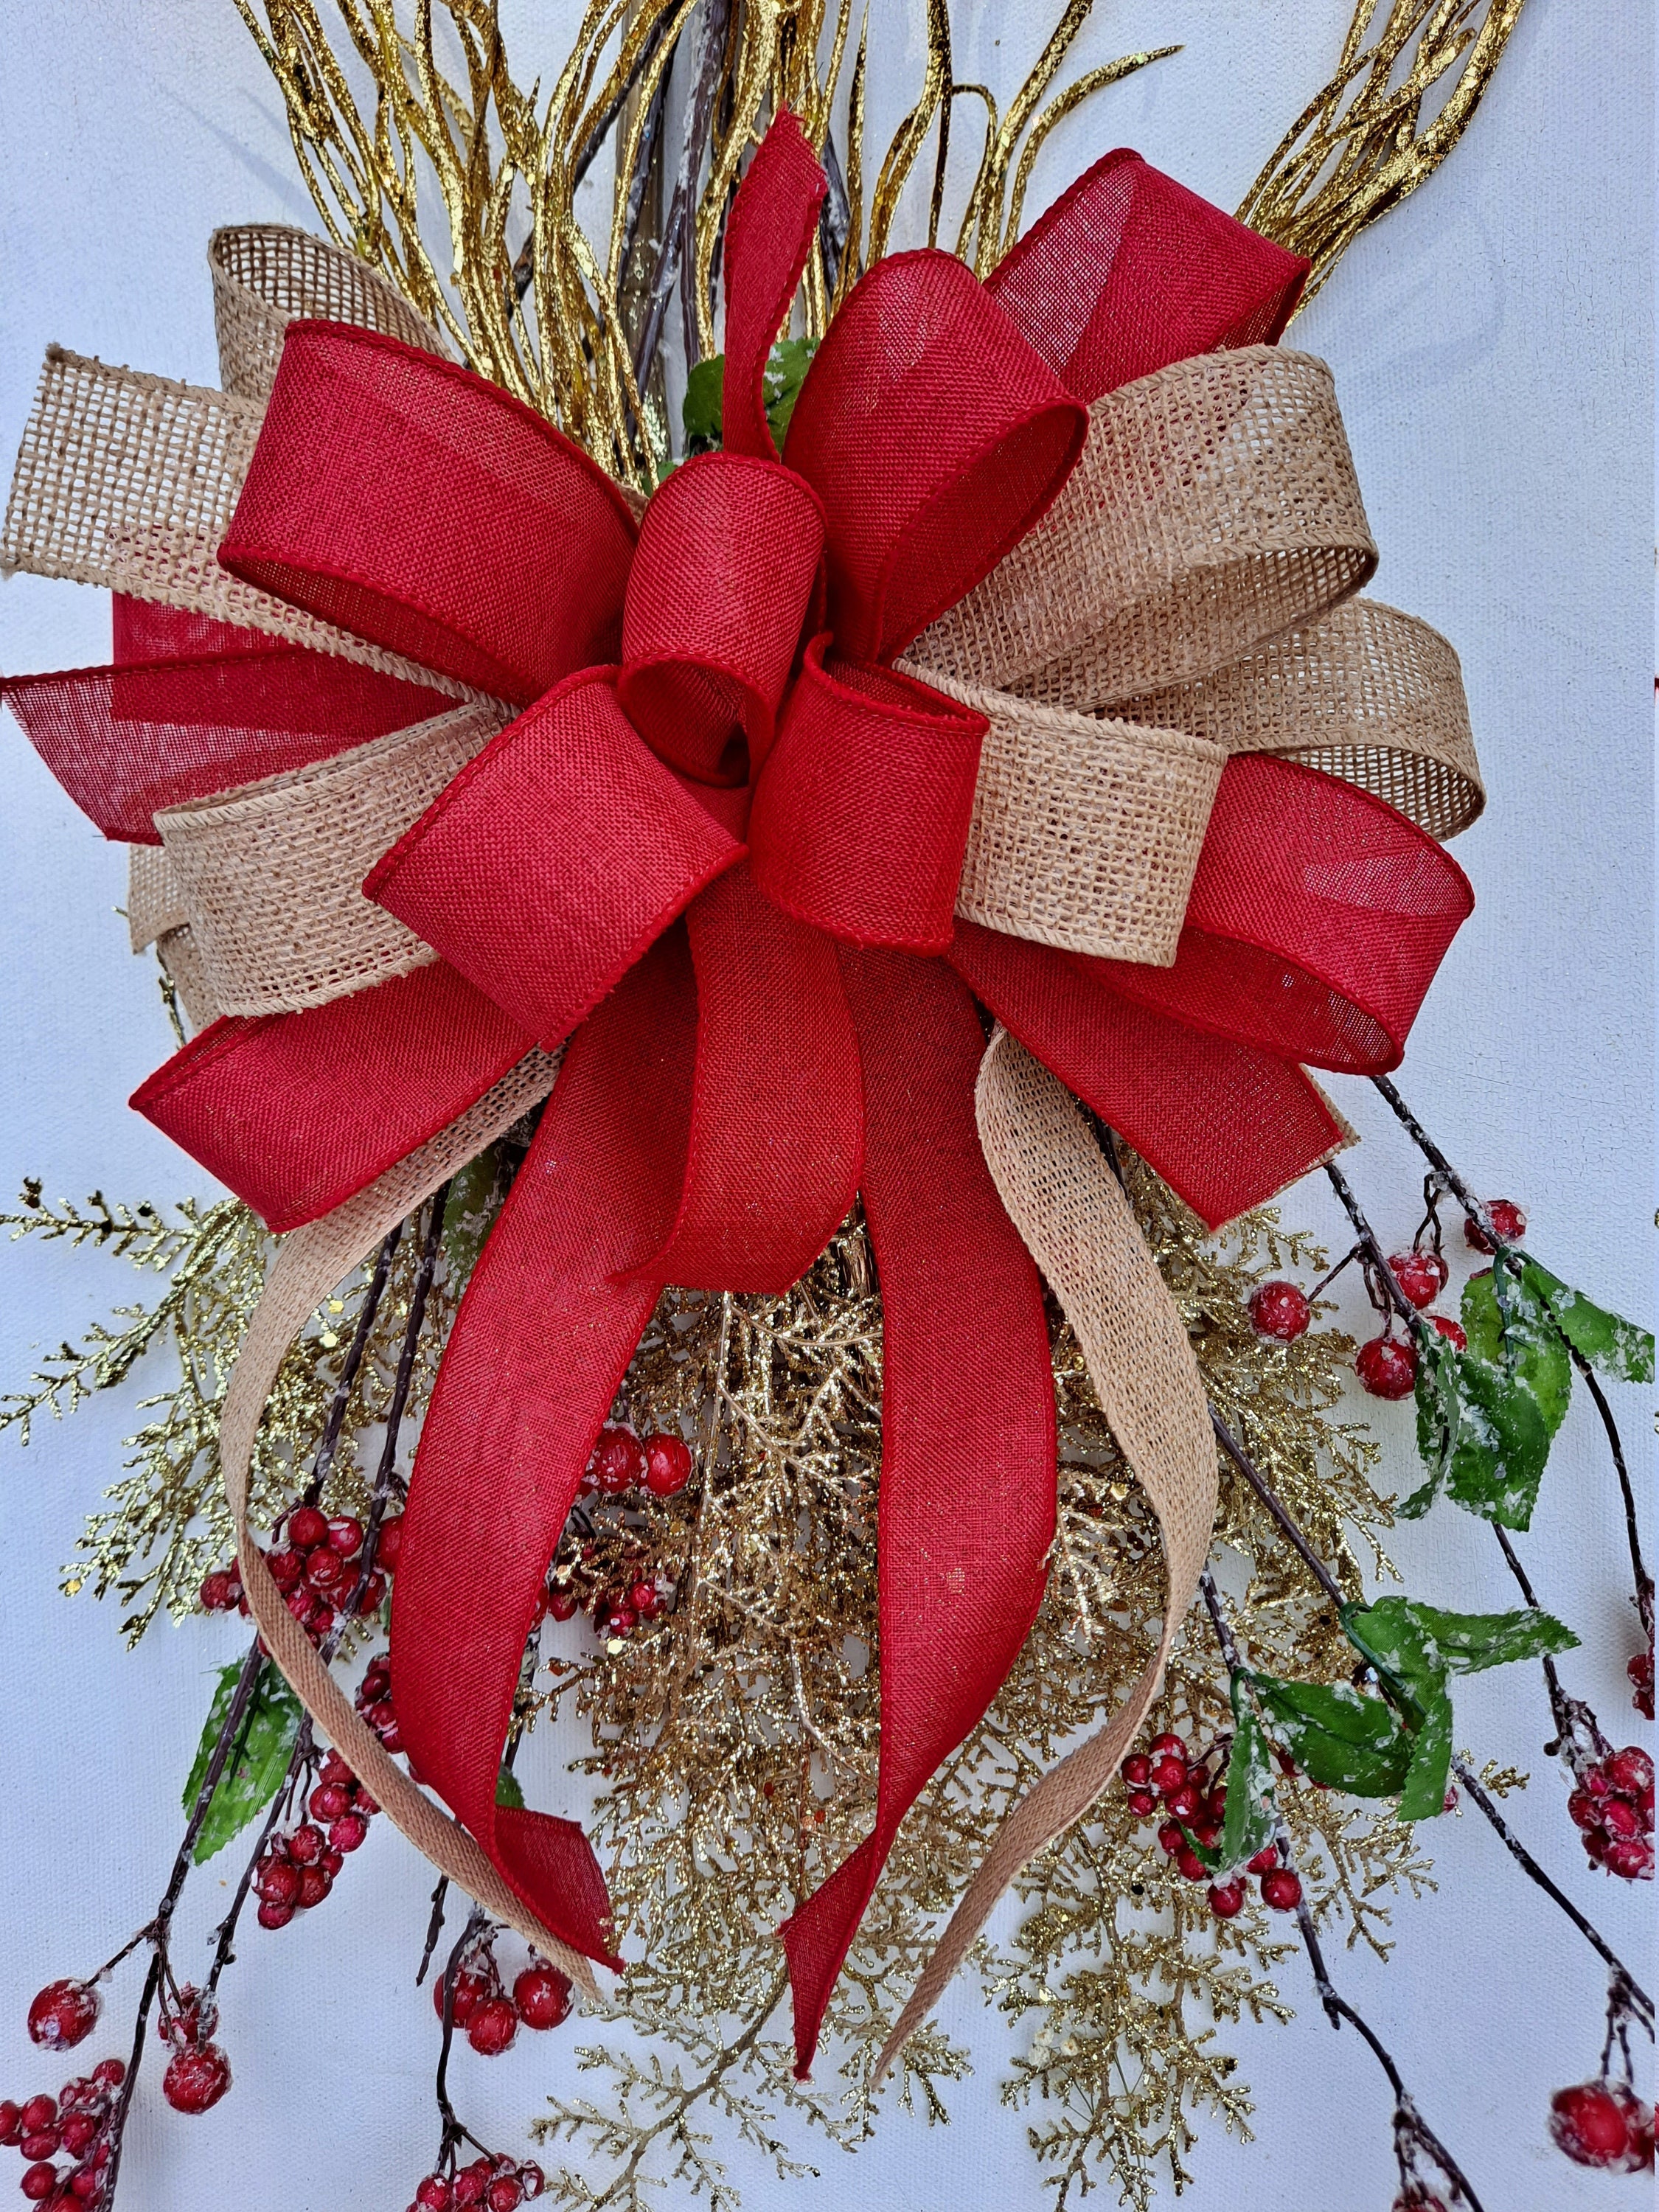 Janou Burlap Bow Holiday Wreath Bow DIY Crafts Rustic Jute Bowknot Ornaments for Christmas Tree Topper Wedding Party Decorations, 9.8x21.6 in